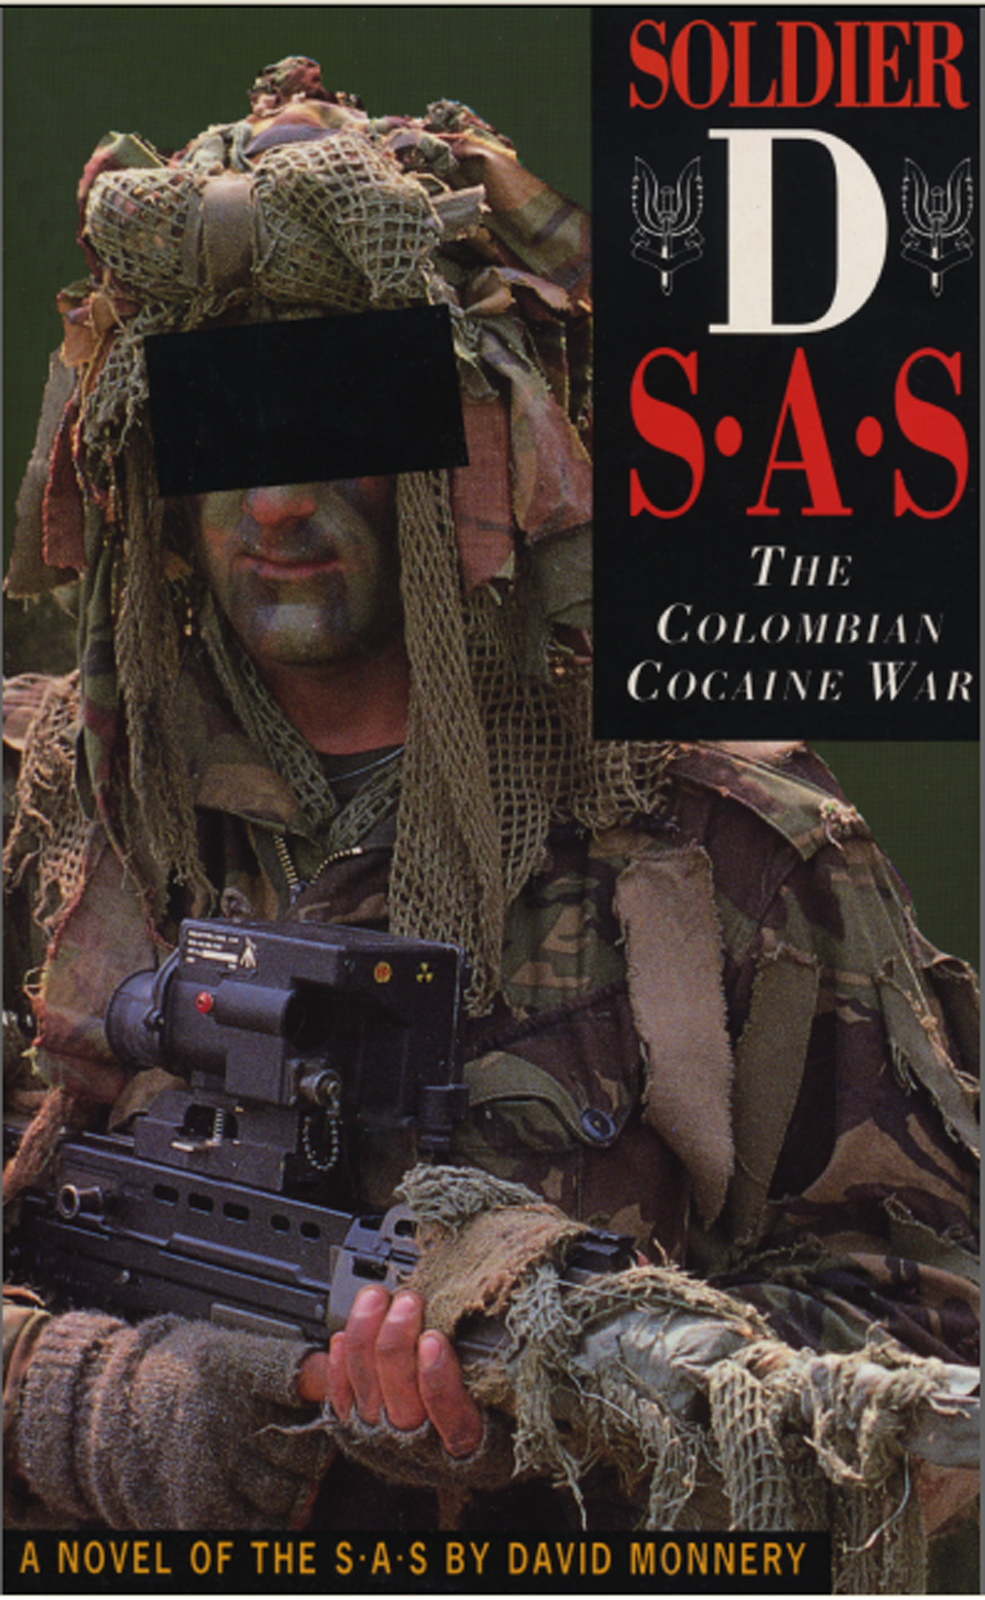 Soldier D: The Colombian Cocaine War